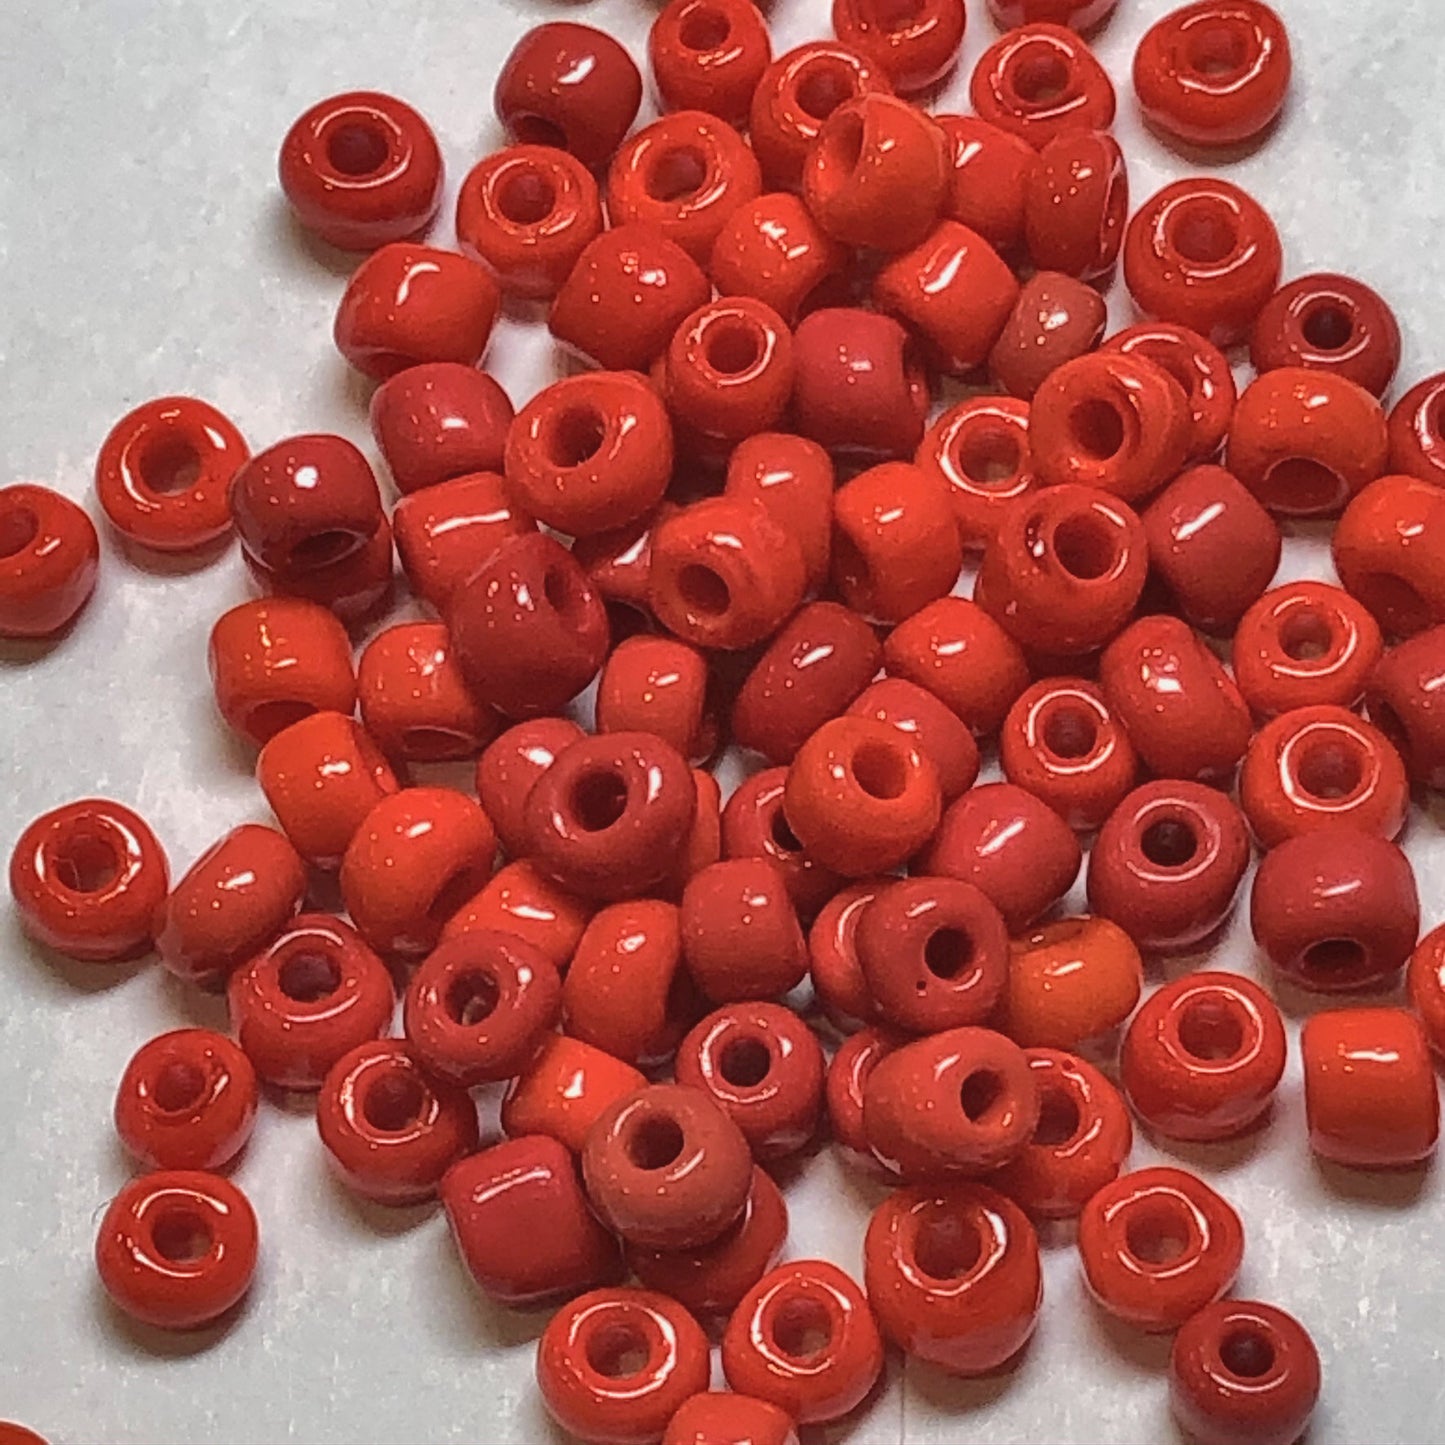 6/0 Shades of Opaque Bright Red Seed Bead, 4.5 or 5 gm